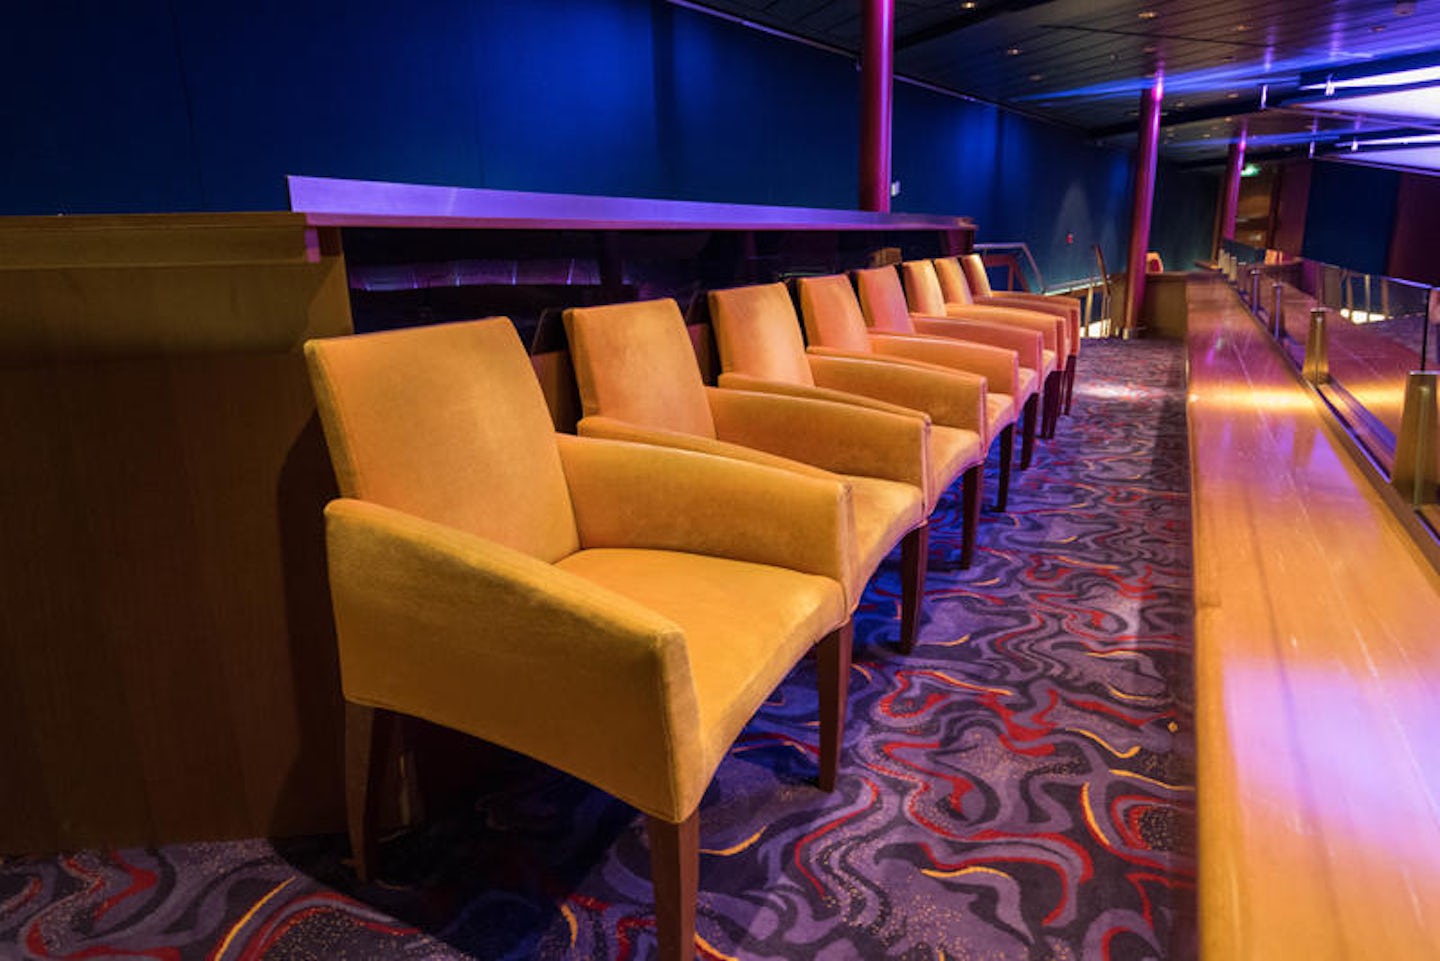 Pacifica Theater on Brilliance of the Seas